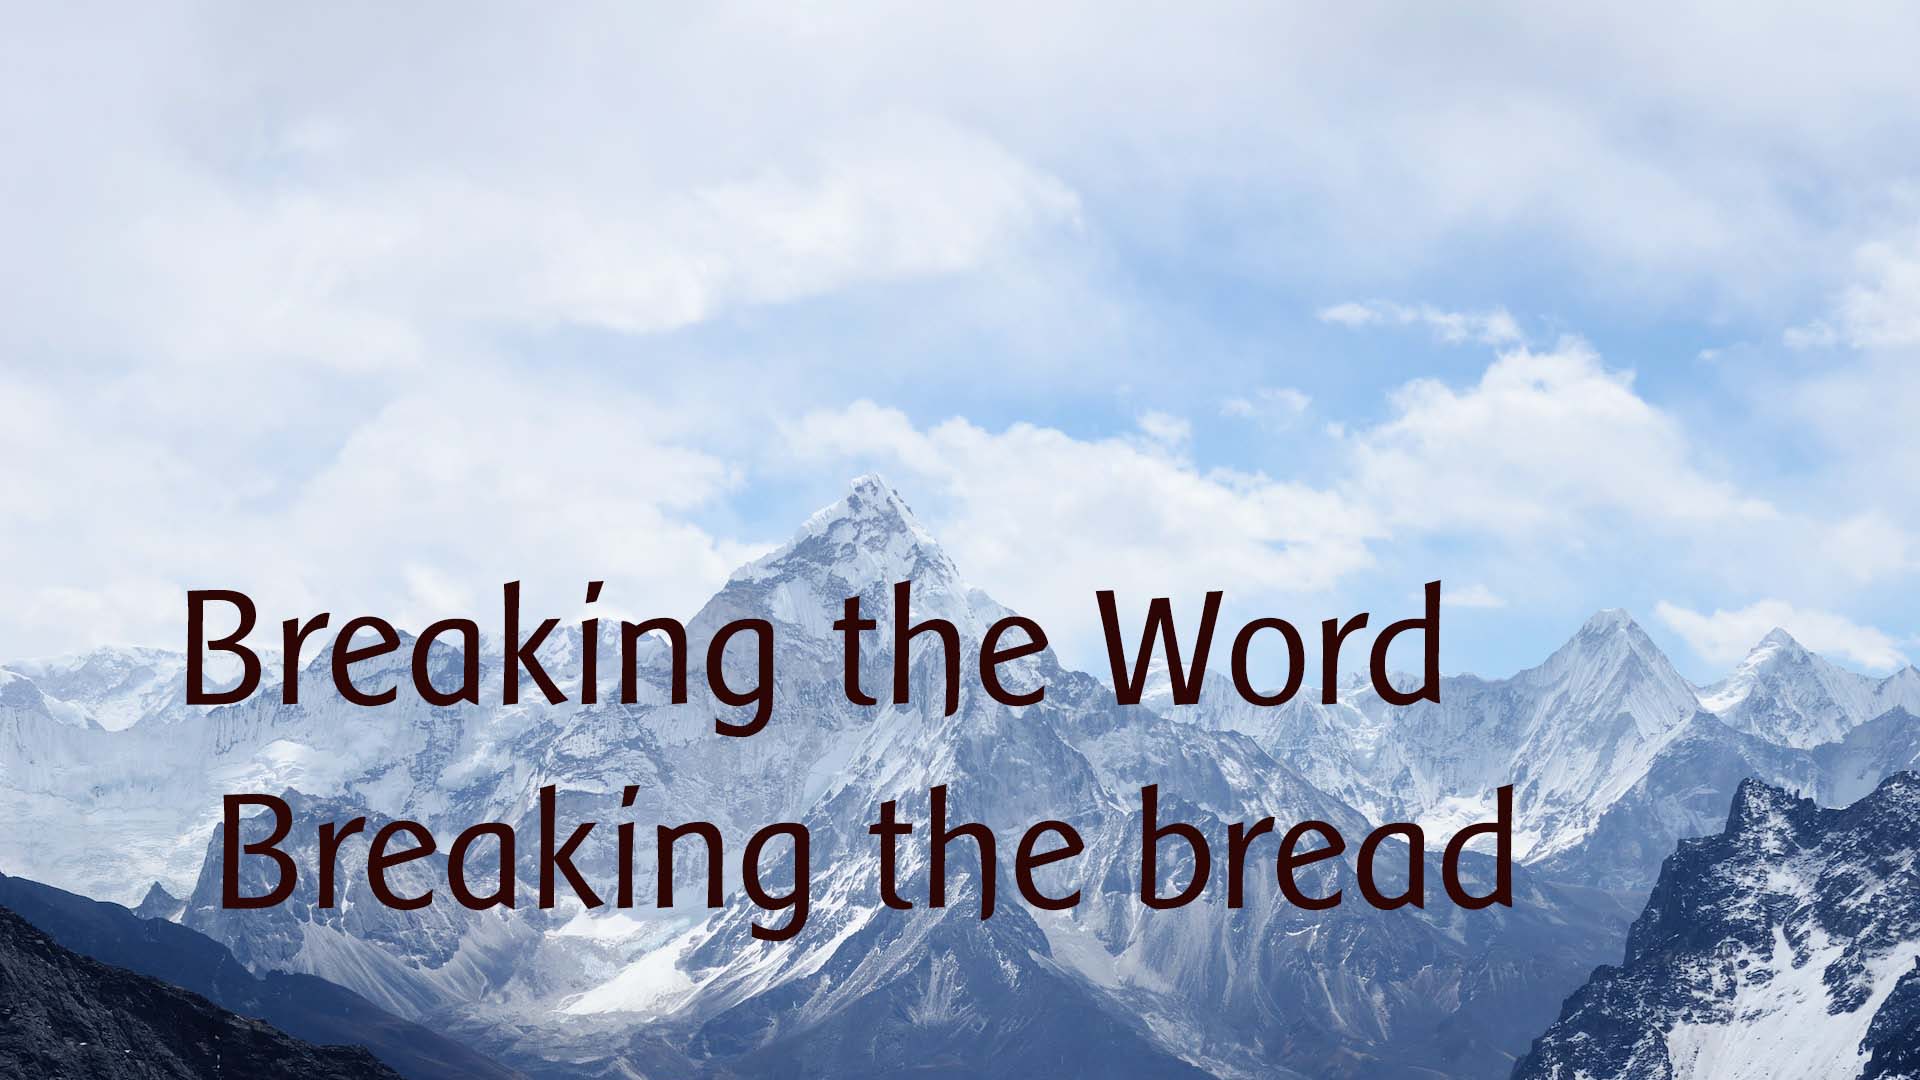 Breaking the Bread and Word